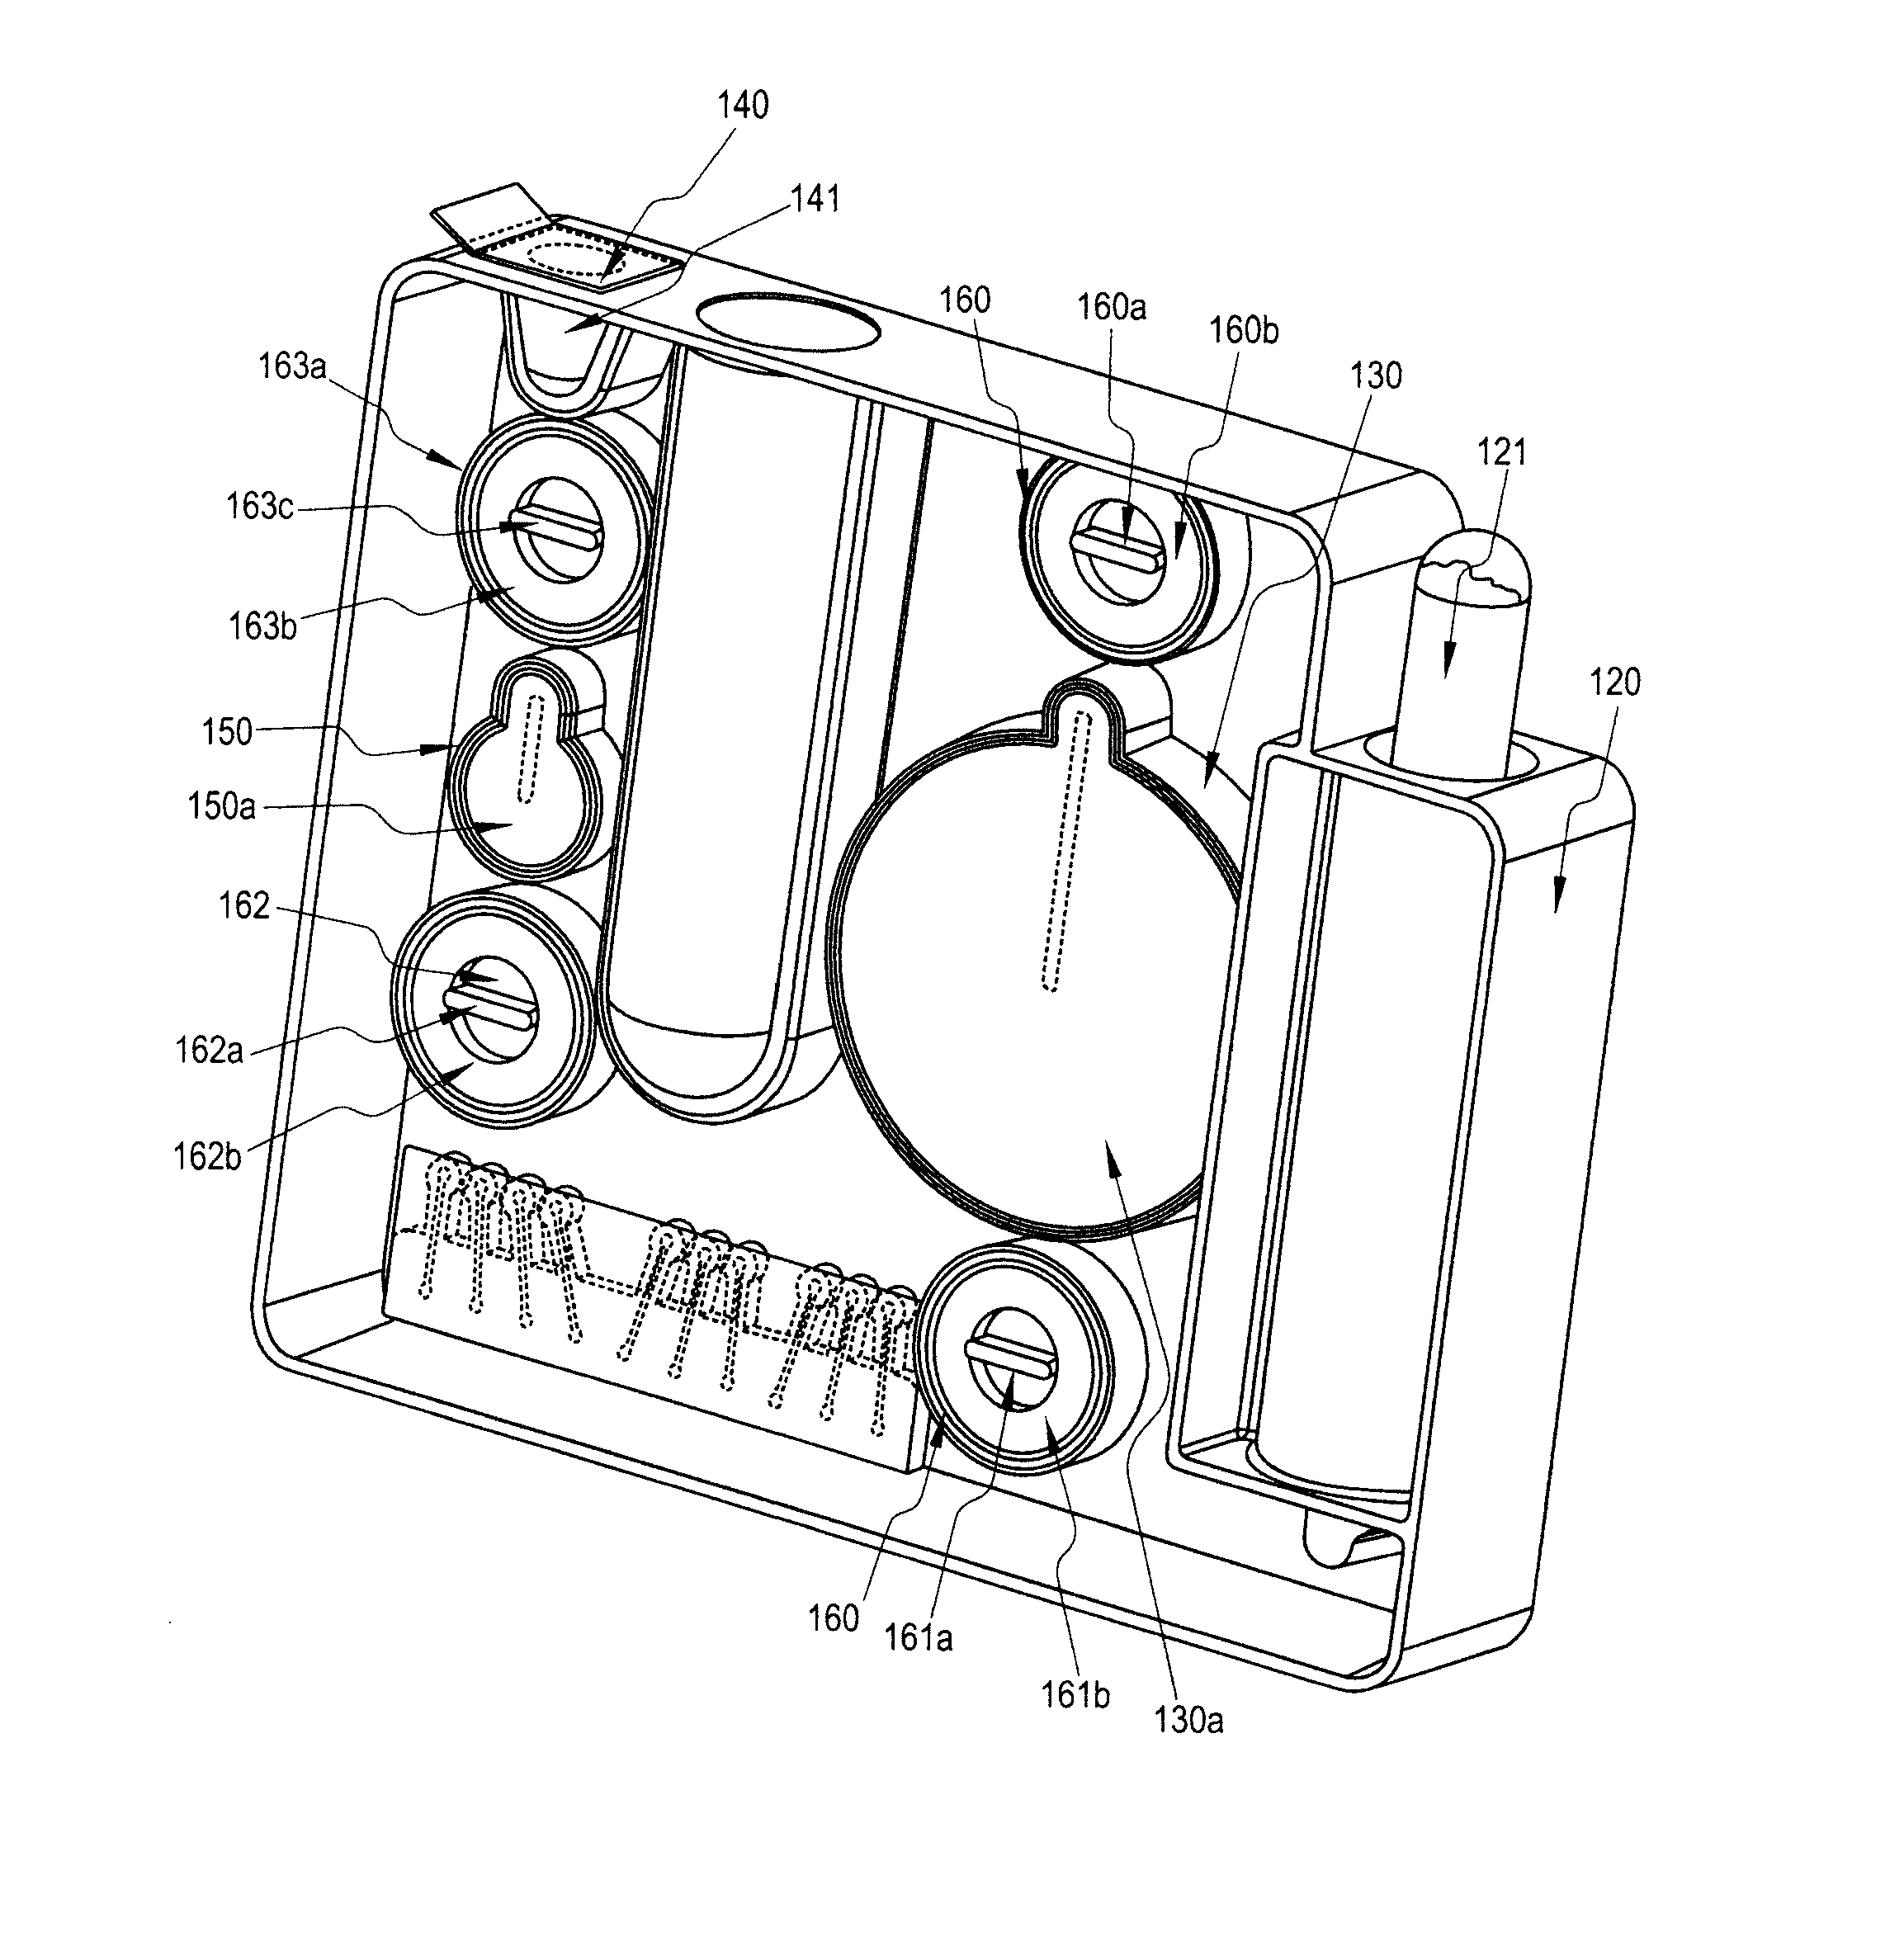 System for isolating biomolecules from a sample